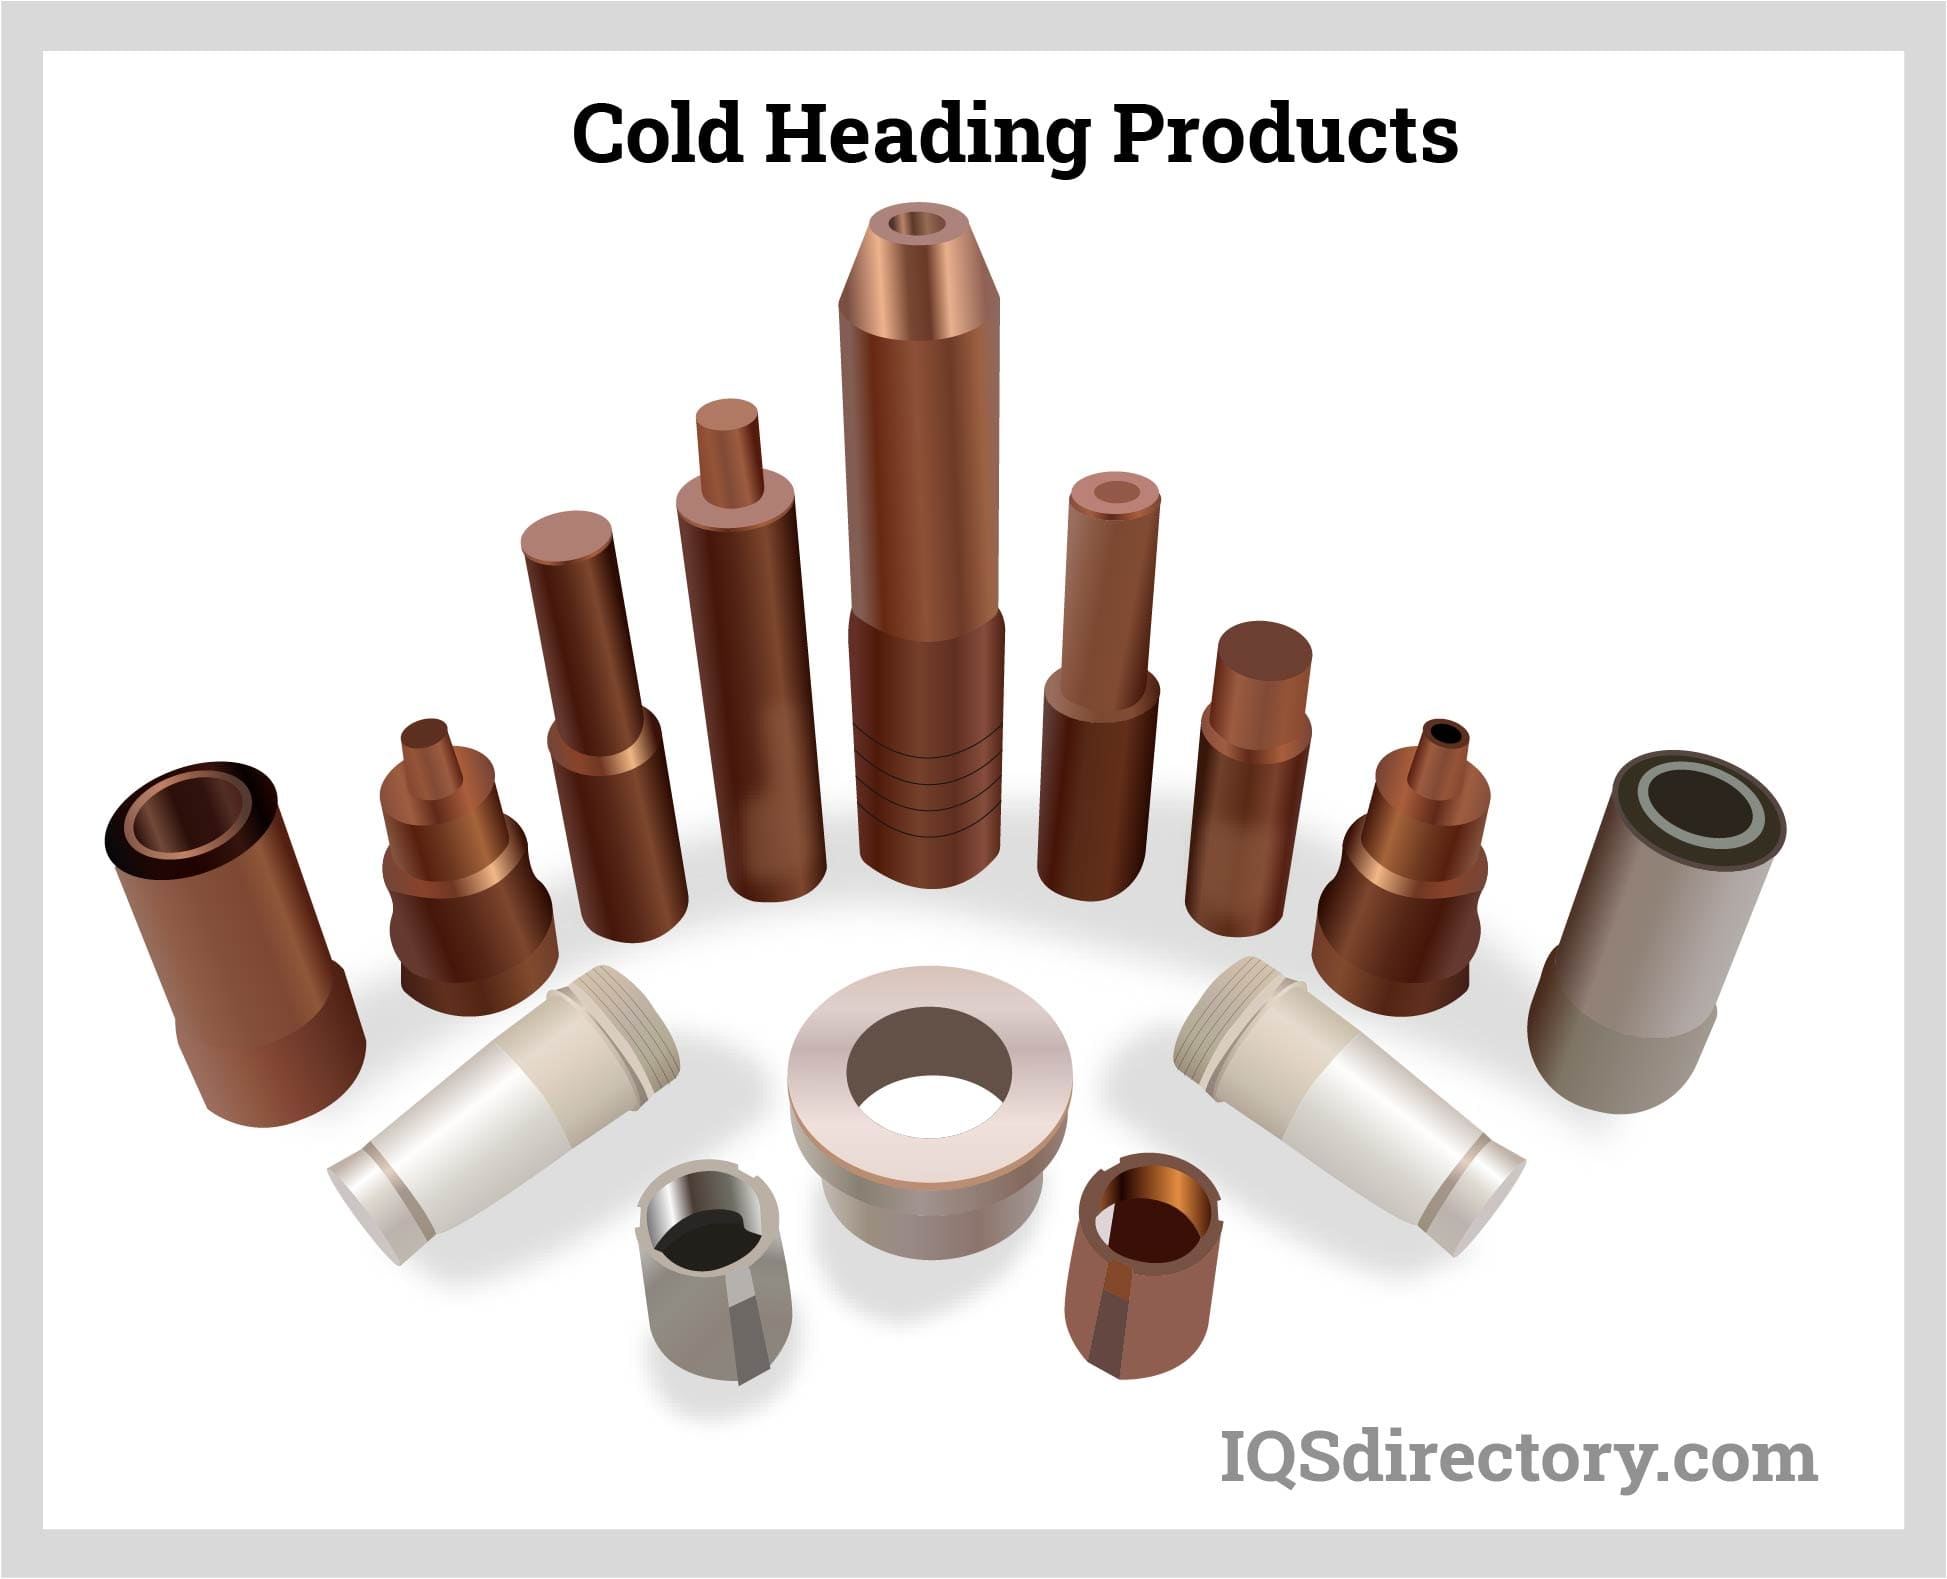 Cold Heading Products